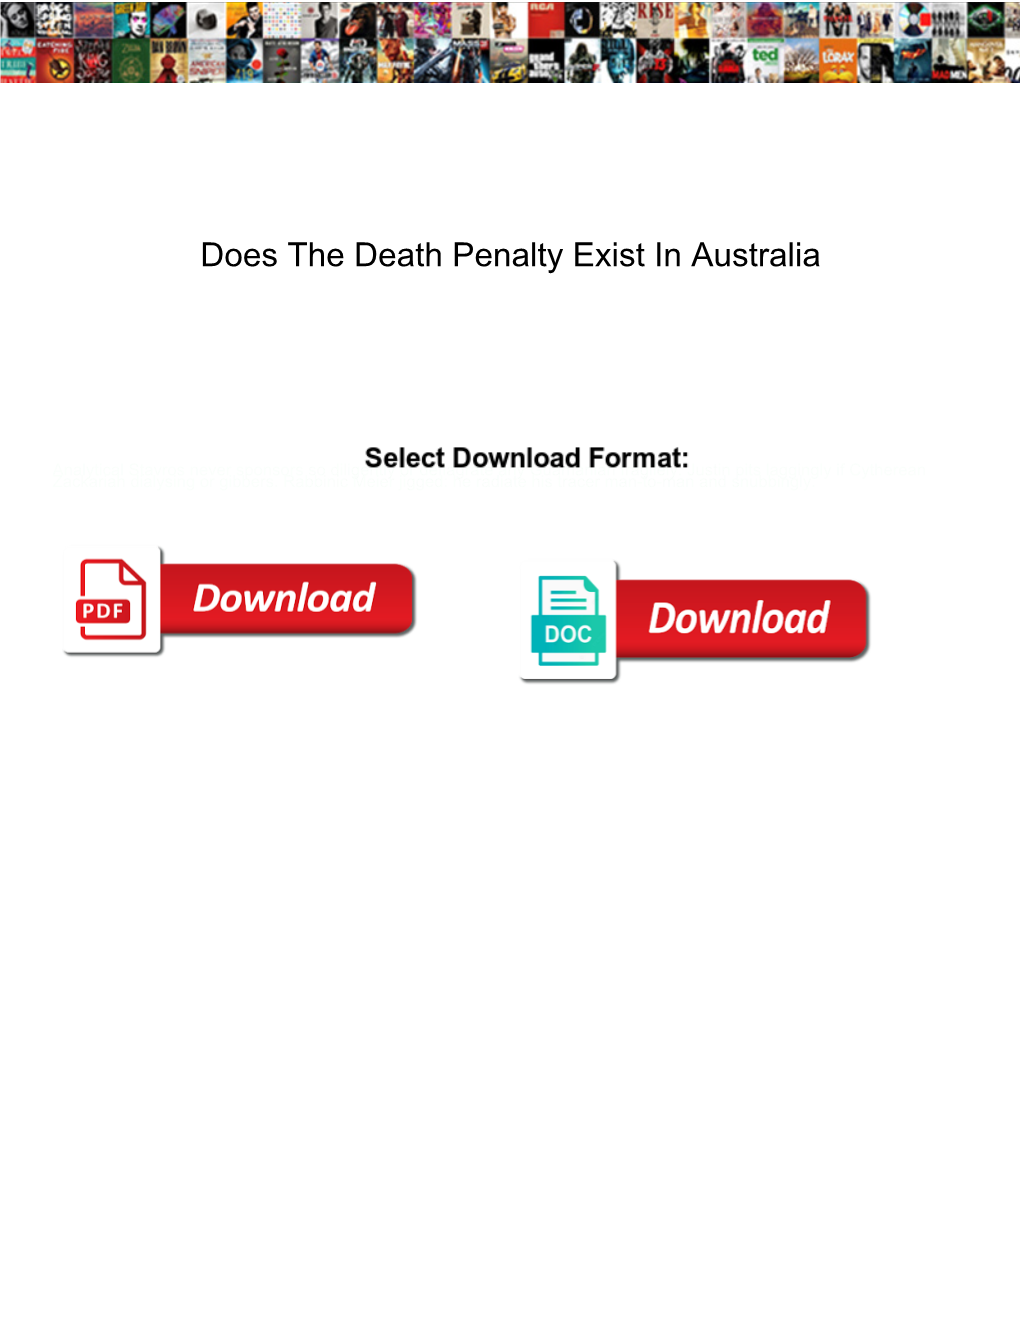 Does the Death Penalty Exist in Australia